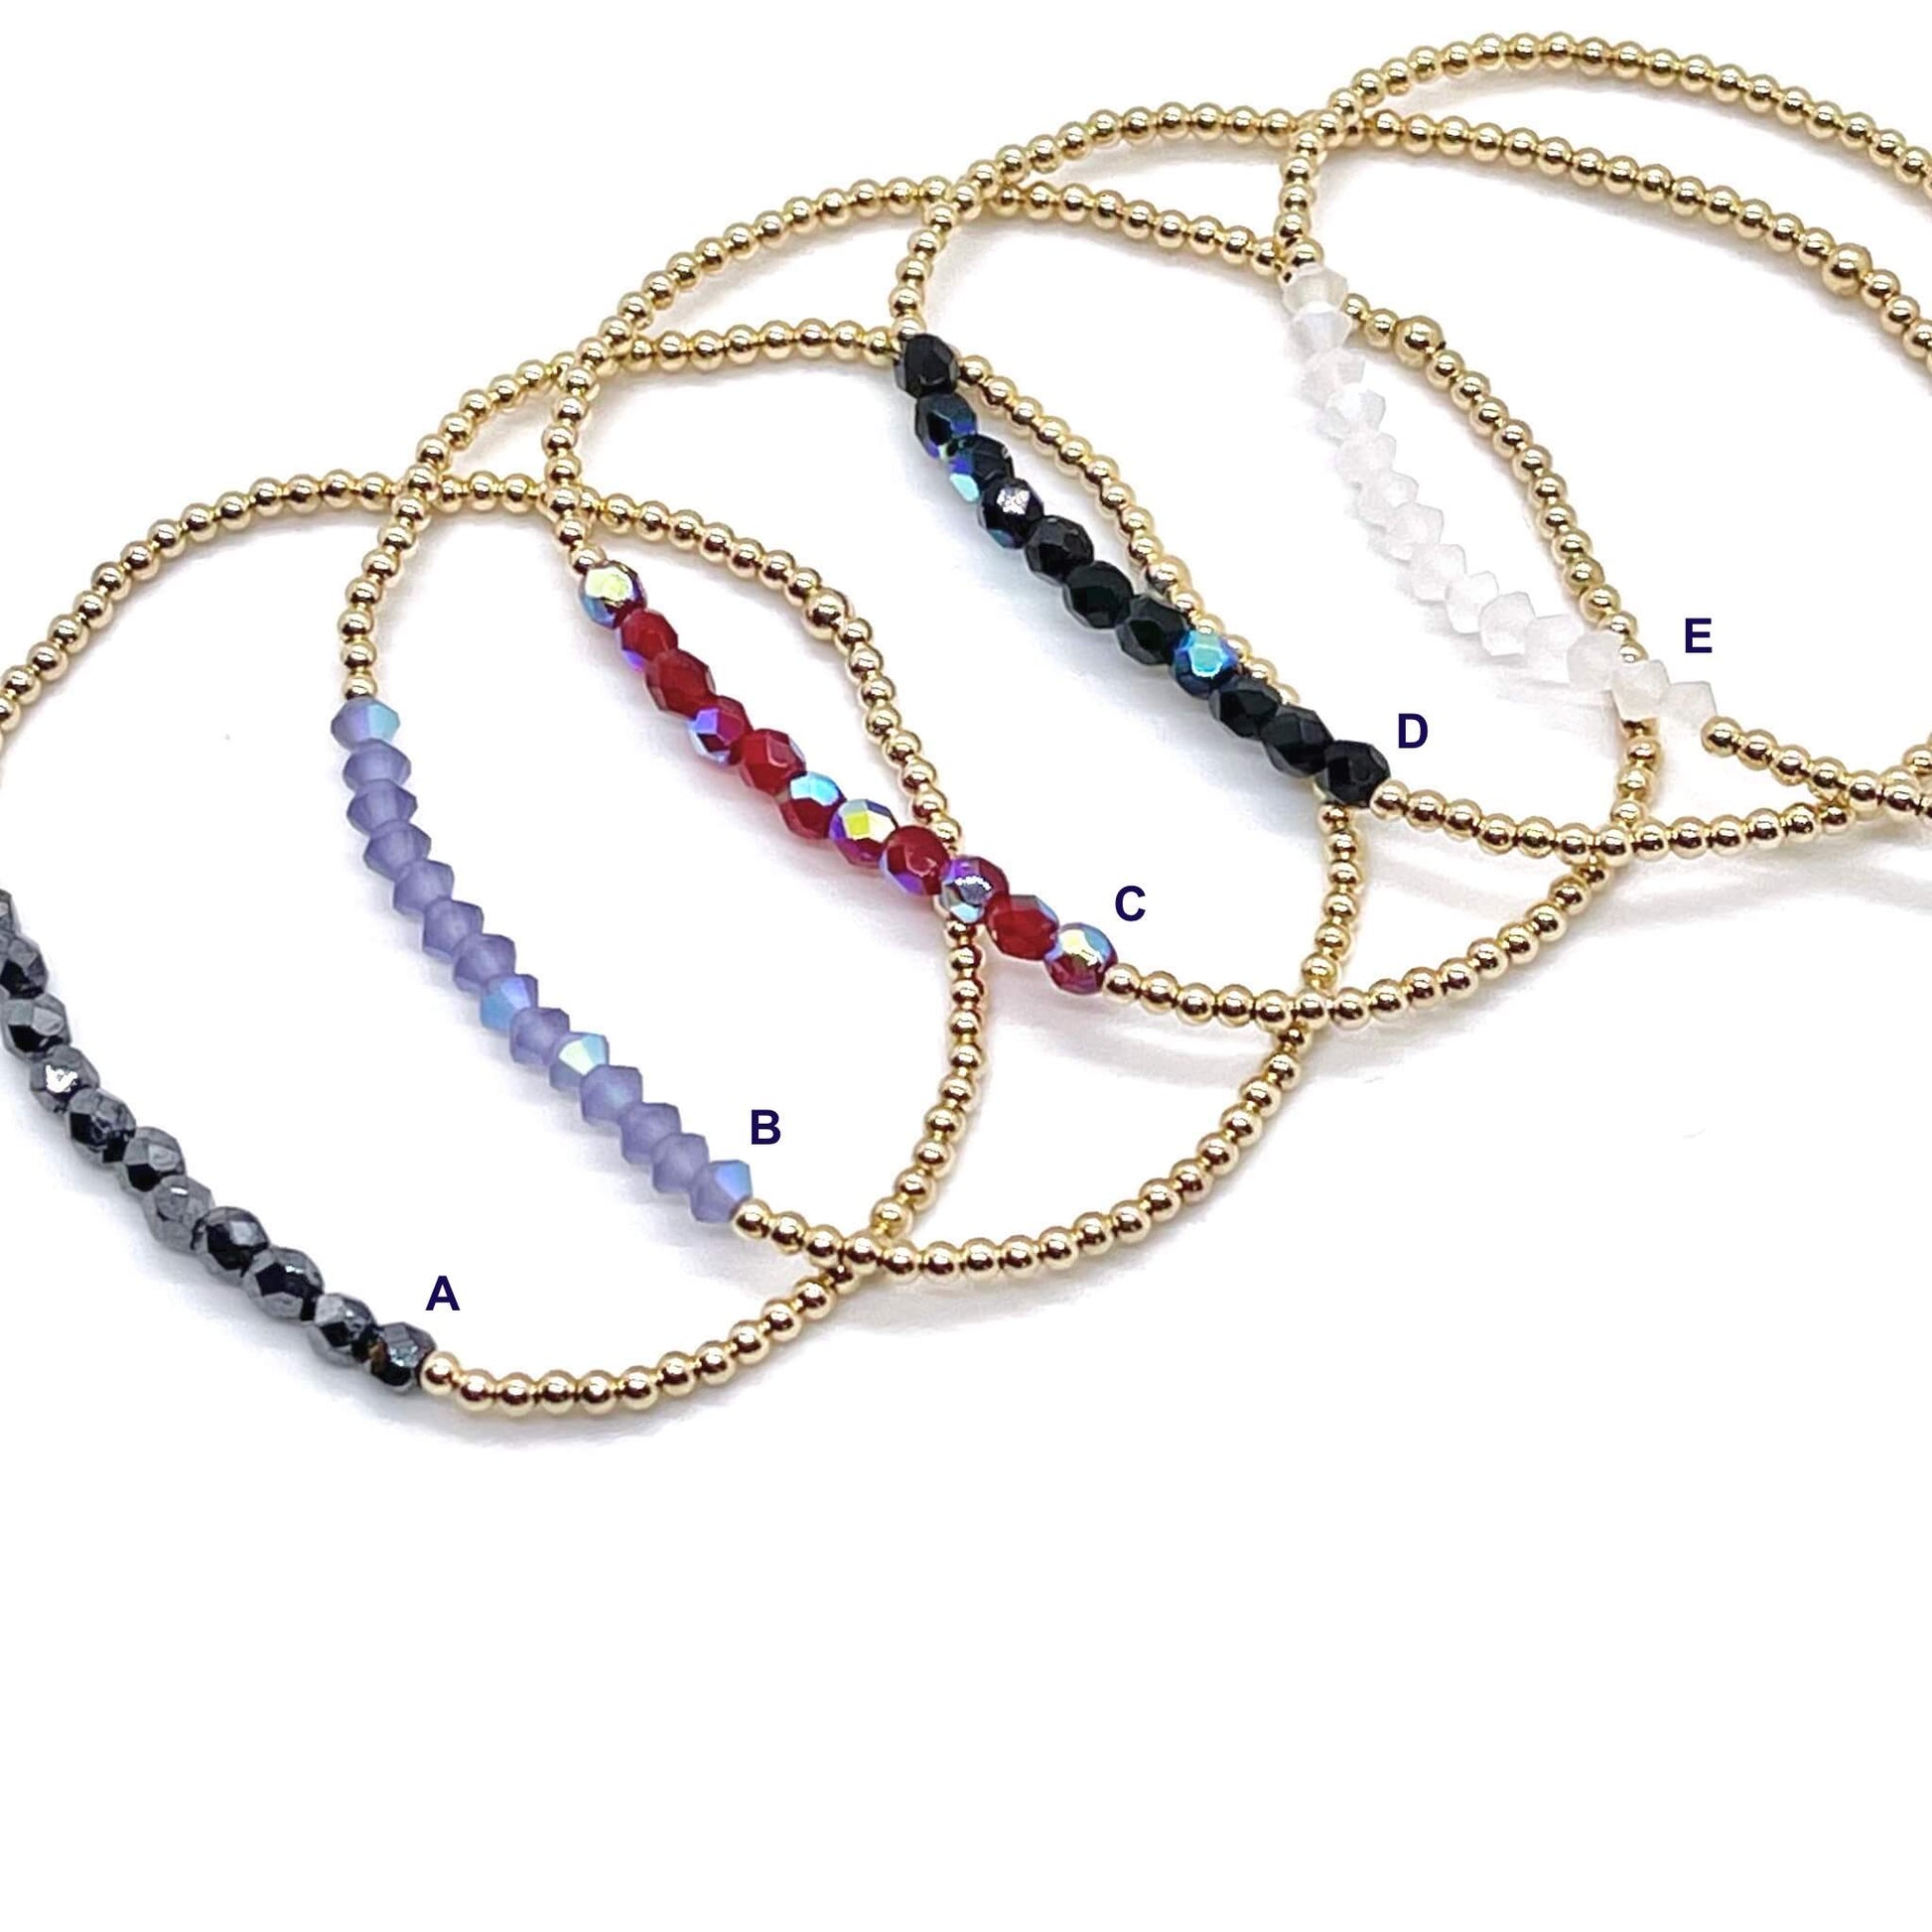 Skinny gold beaded bracelets with crystal color bars in a choice of hematite, lavender, red, black, or white.